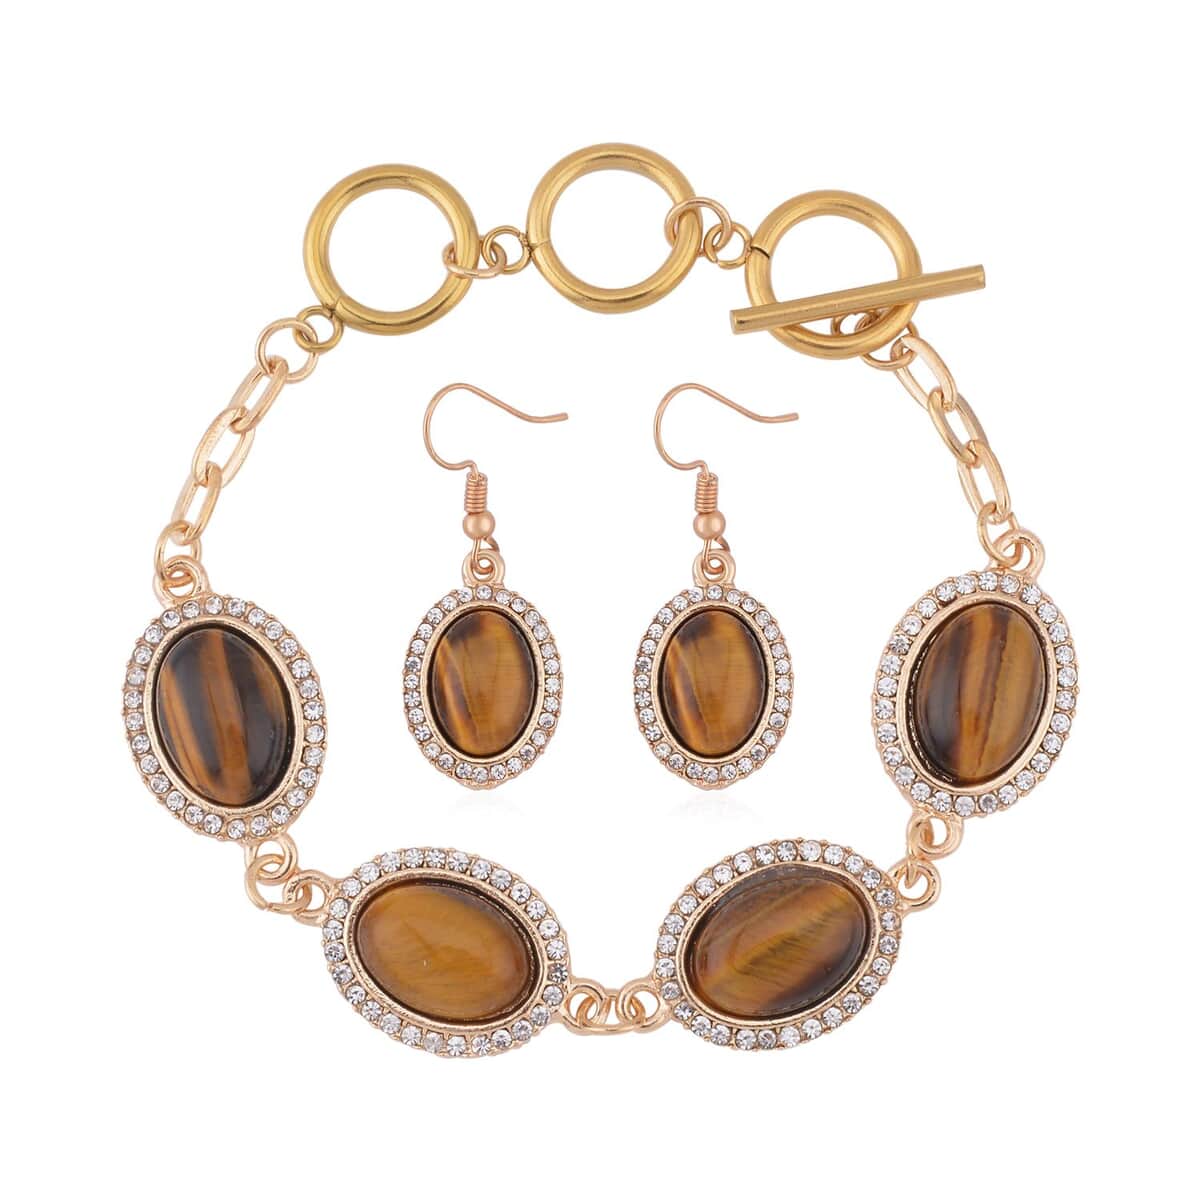 Yellow Tiger's Eye and White Austrian Crystal 56.00 ctw Bracelet (6.50-8.0In) and Earrings in Goldtone image number 0